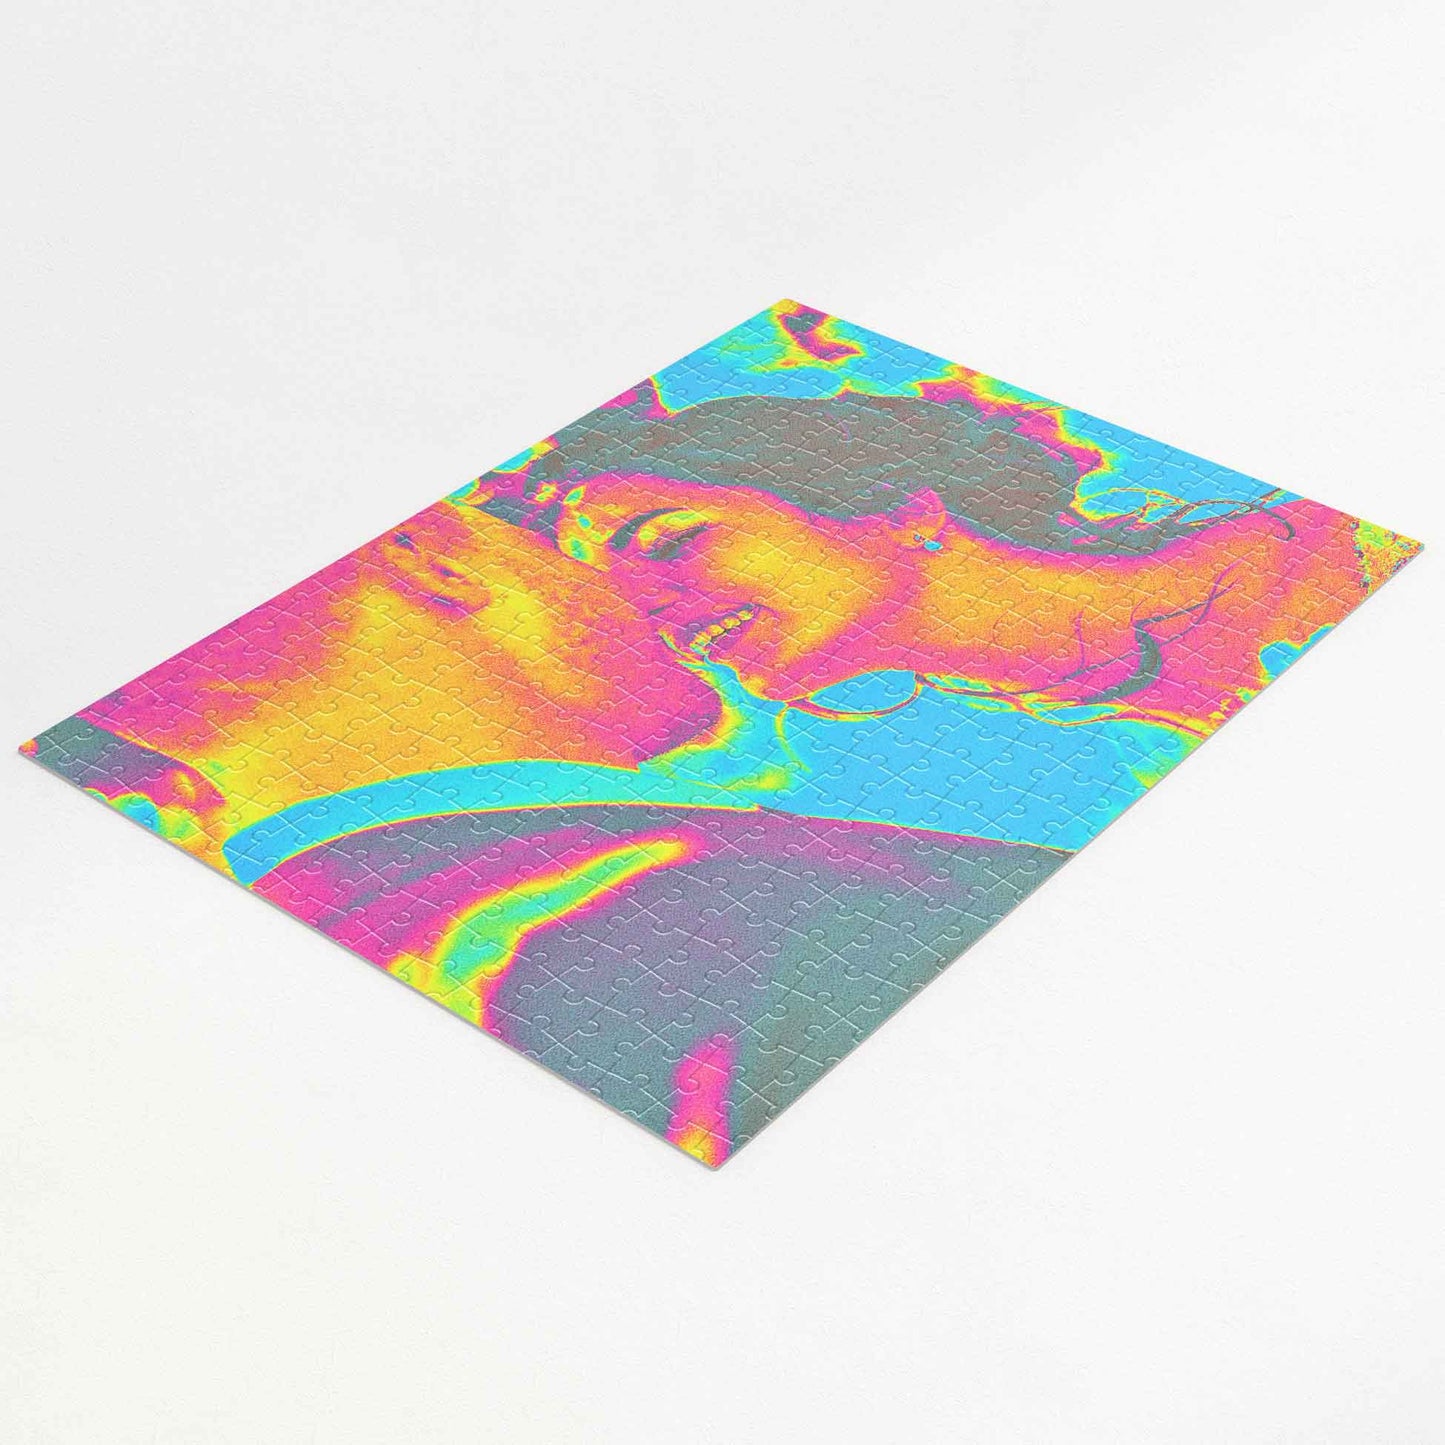 Add a touch of artistry with our Personalised Acid Trip Jigsaw Puzzle. Print from photo, showcasing cool acid colors effect in blue, green, and pink hues. Handmade and funky, it's a unique and trendy gift for friends and family